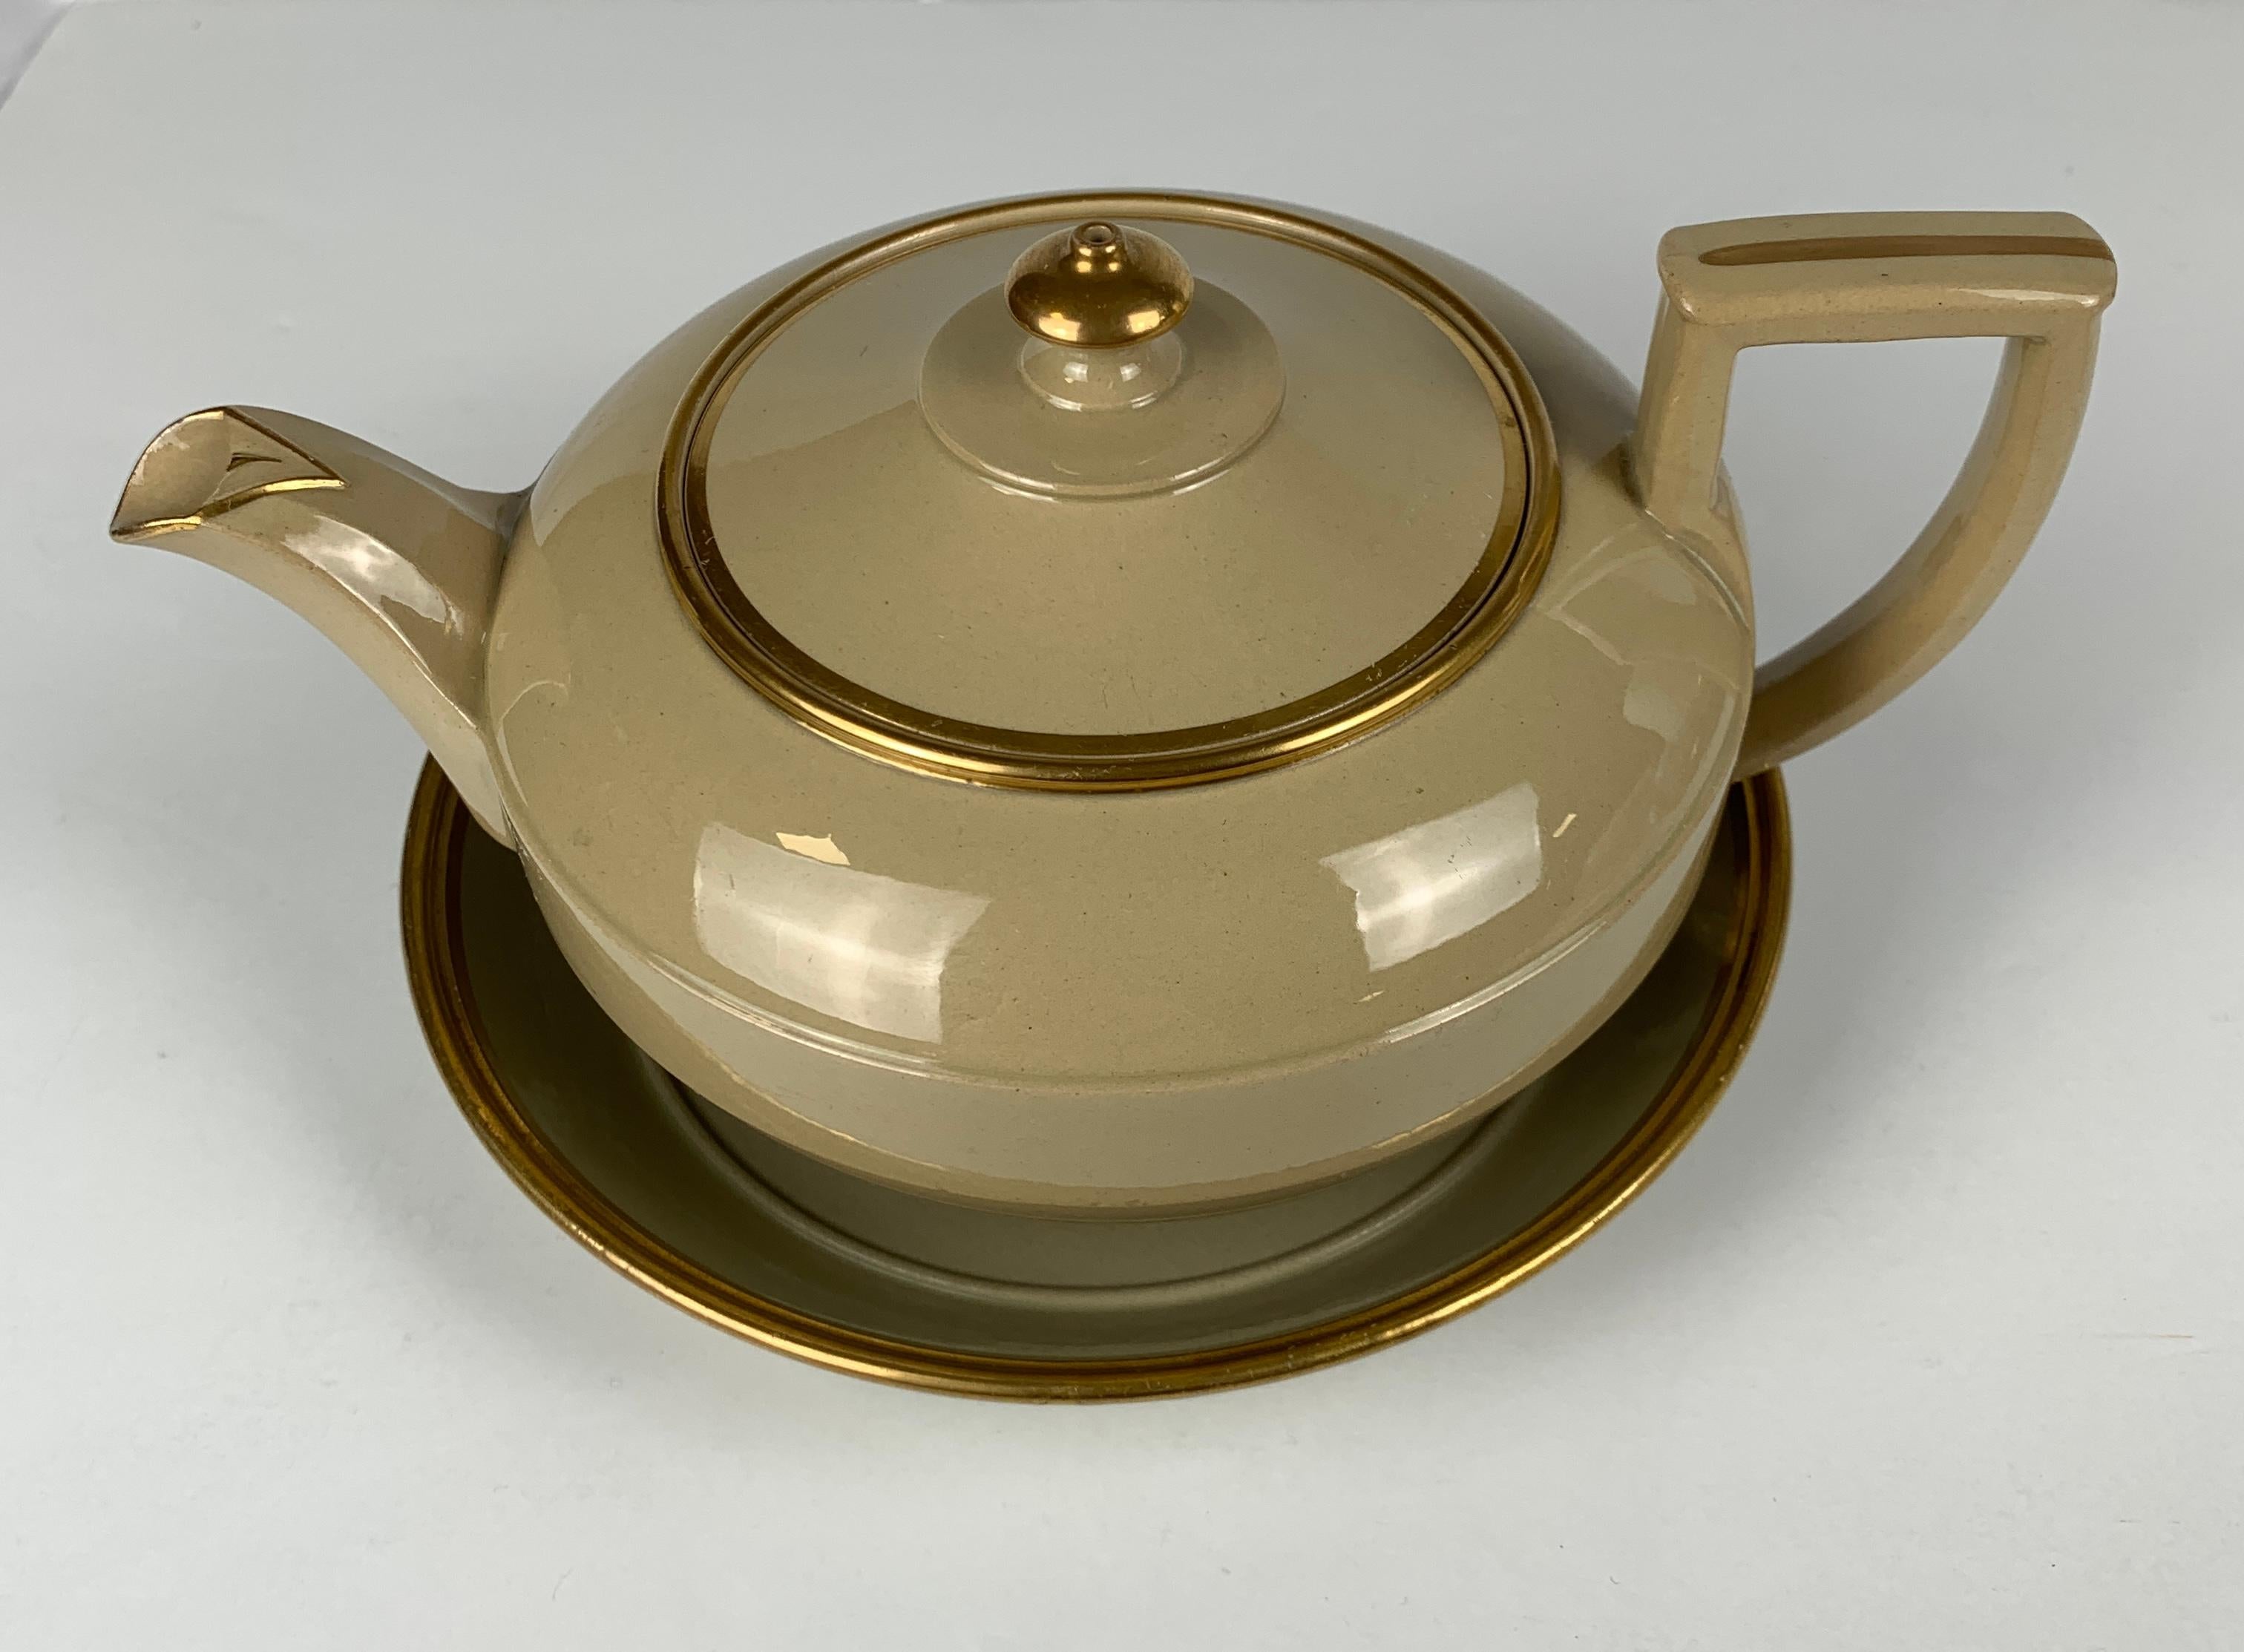 Wedgwood made this drabware teapot and stand in Staffordshire, England, in the first quarter of the 19th century, circa 1825.
The design is simple and elegant, and the decoration is minimal, with only a bit of gilt trim accentuating the